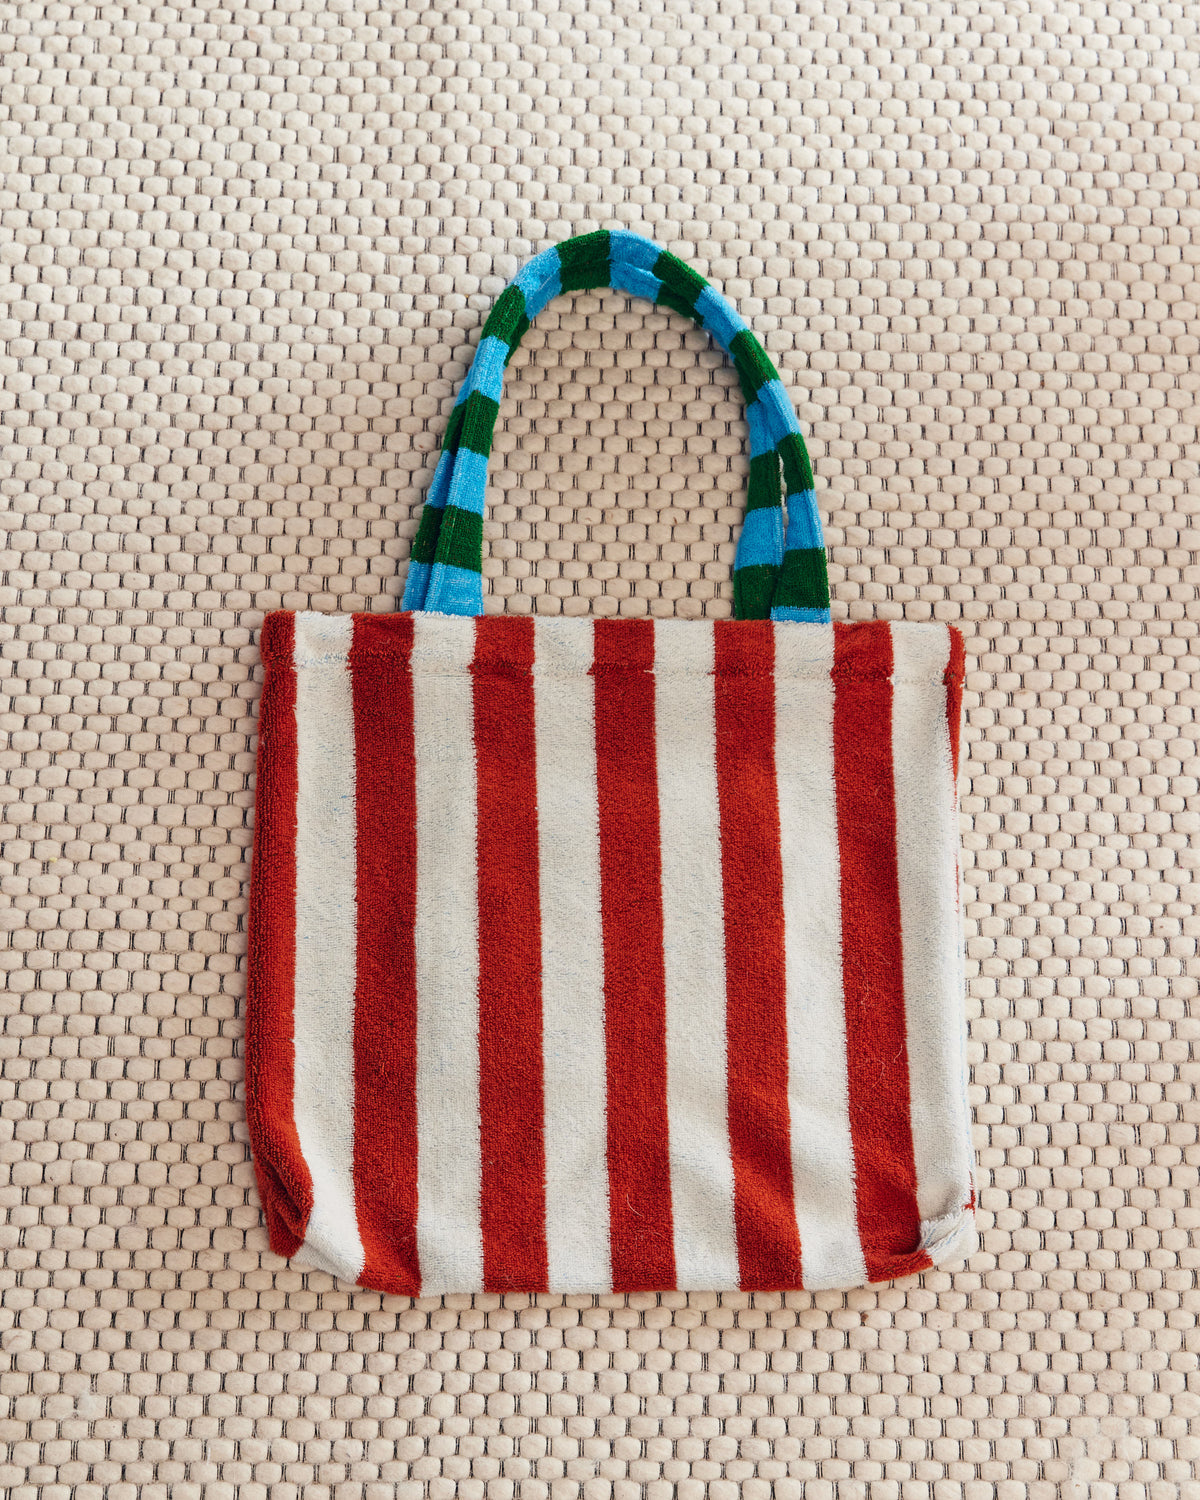 Brown and white, blue and green, this striped tote is peachy keen!